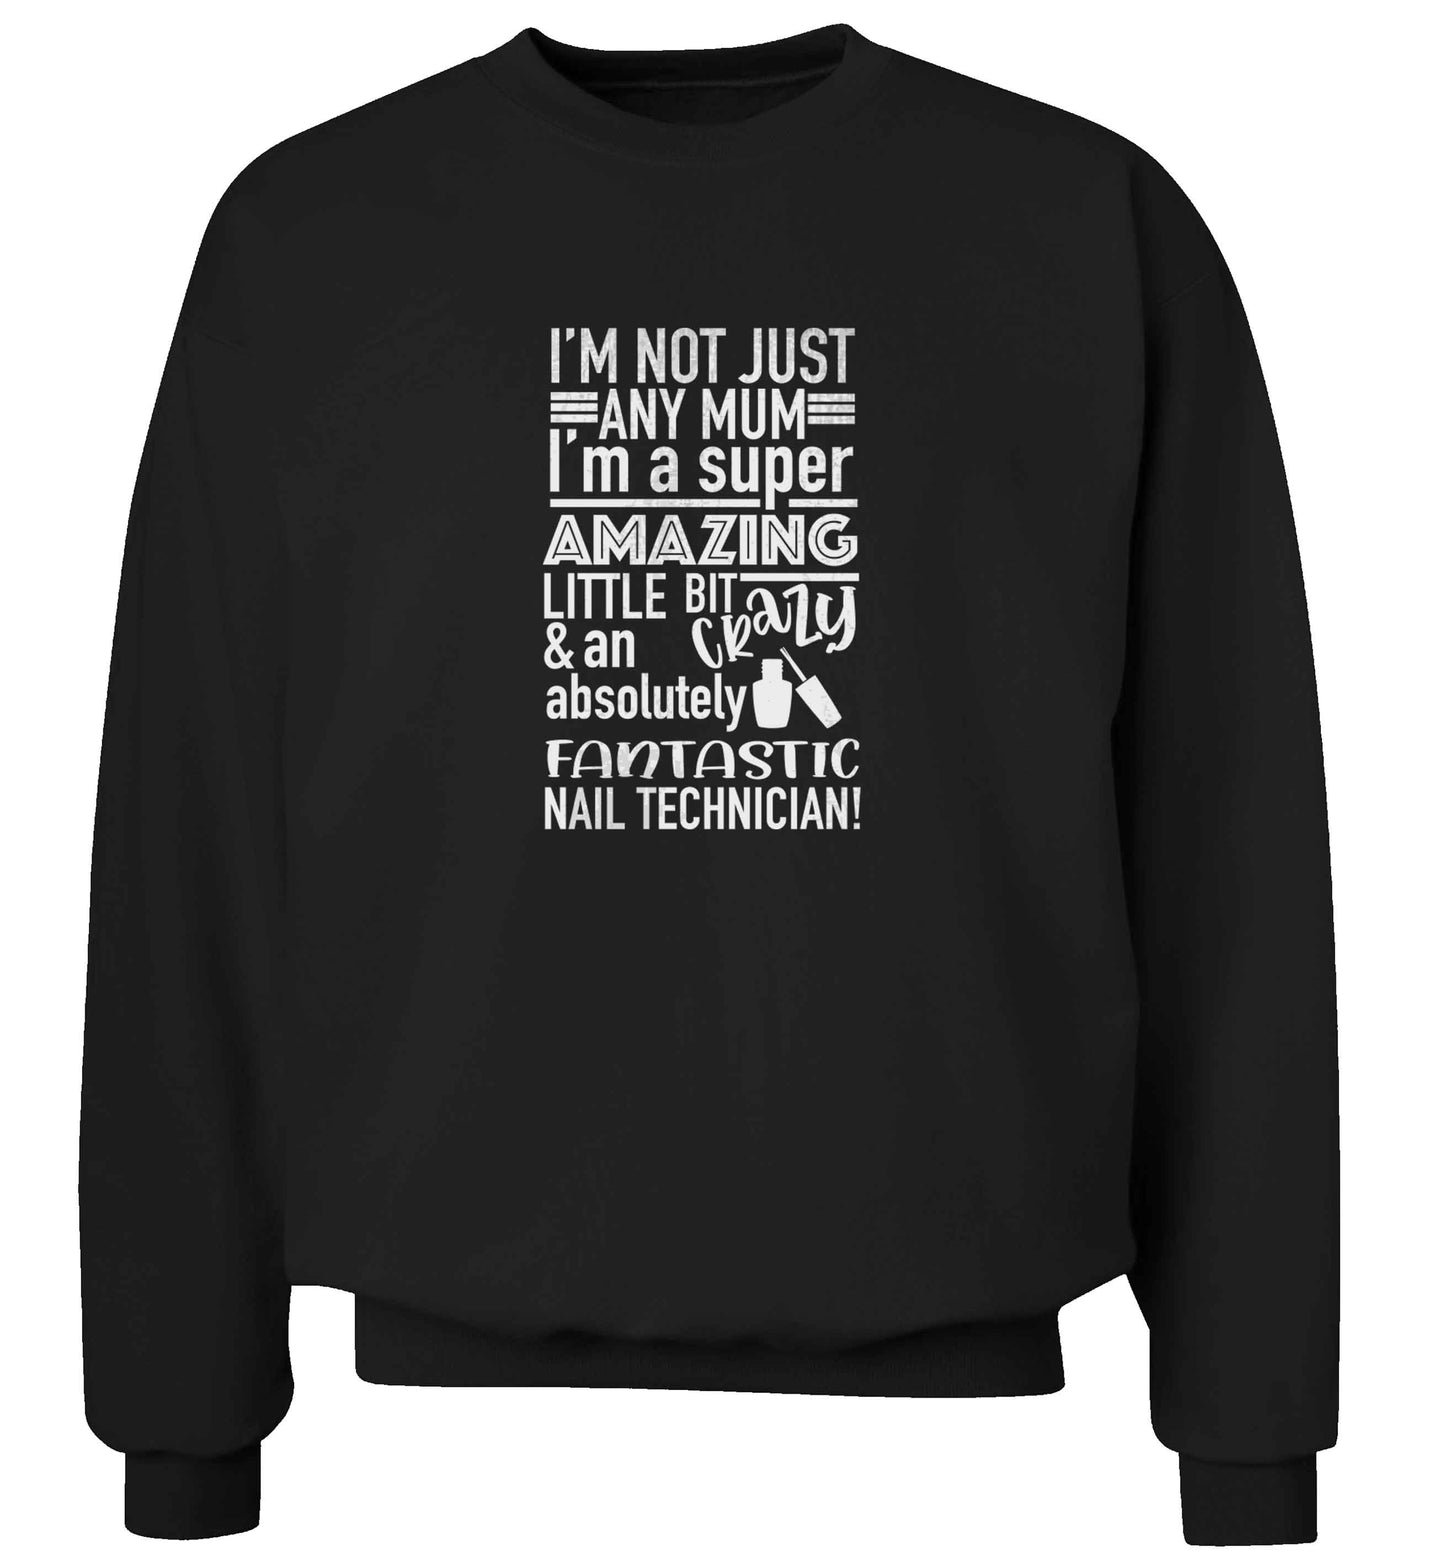 I'm not just any mum I'm a super amazing little bit crazy and an absolutely fantastic nail technician! adult's unisex black sweater 2XL